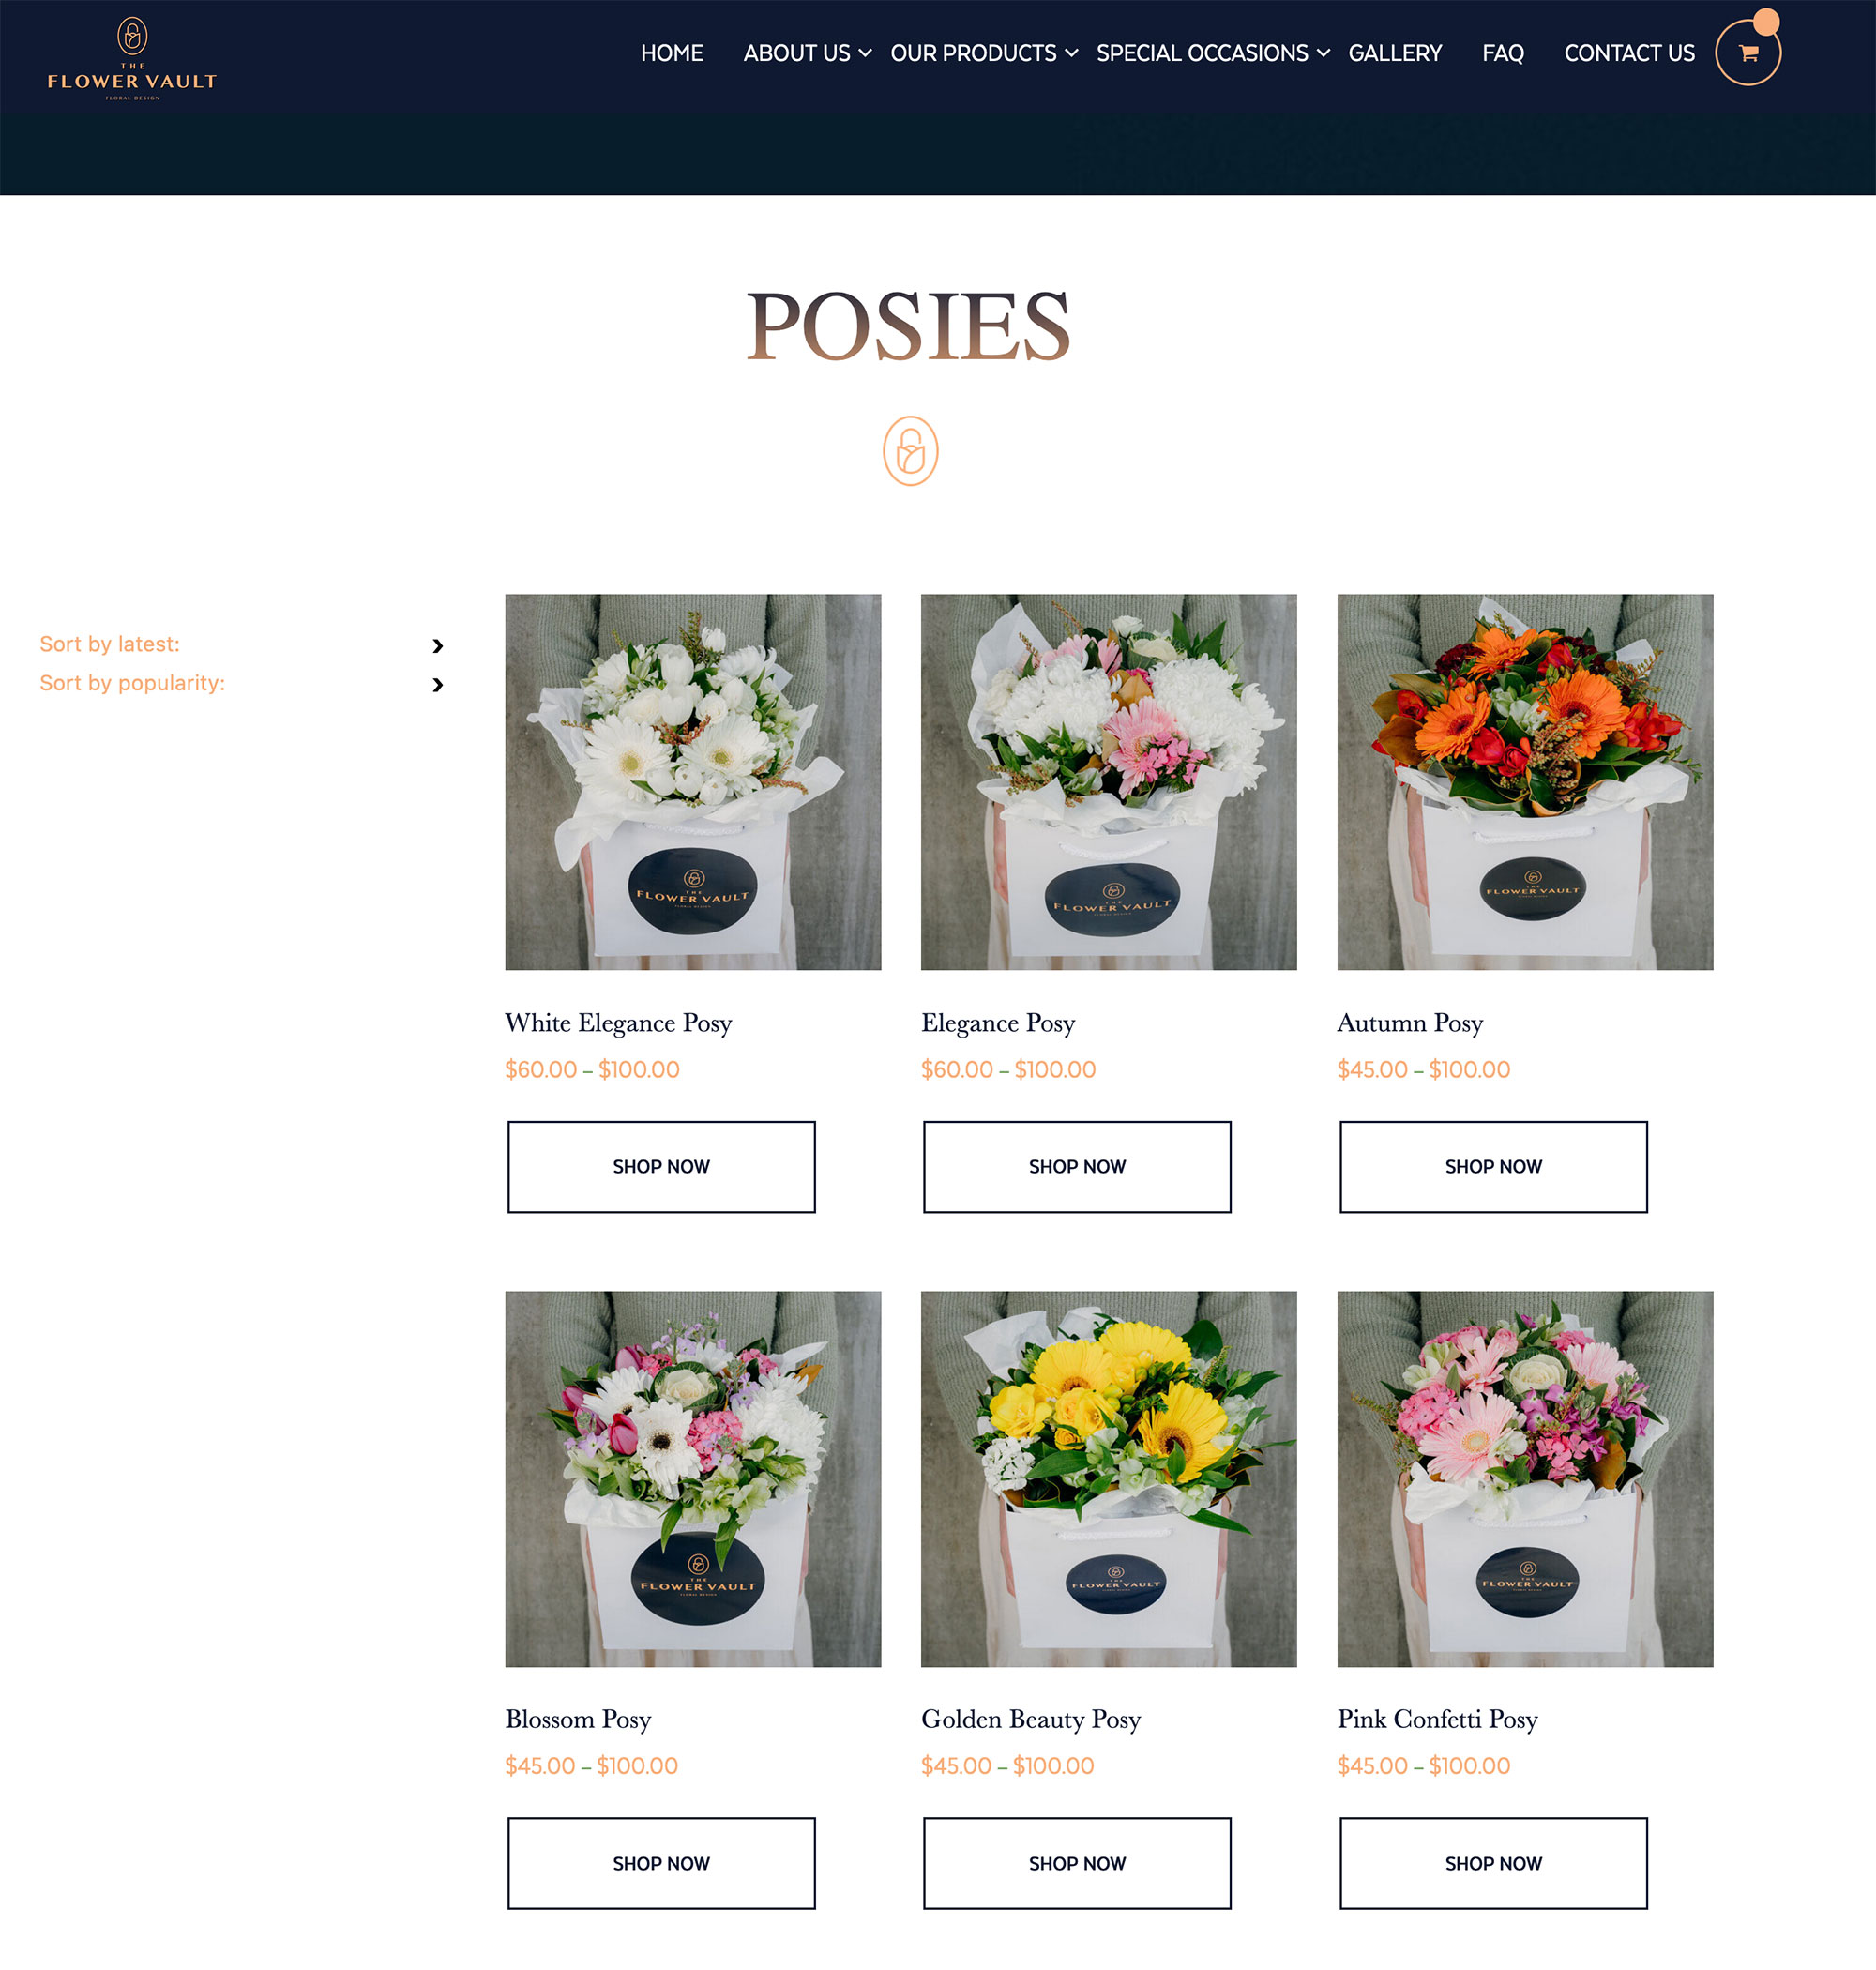 6 images of posies in boxes by Auckland florist The Flower Vault website for online shopping commercial photos by Sarah Weber Photography in Hobsonville